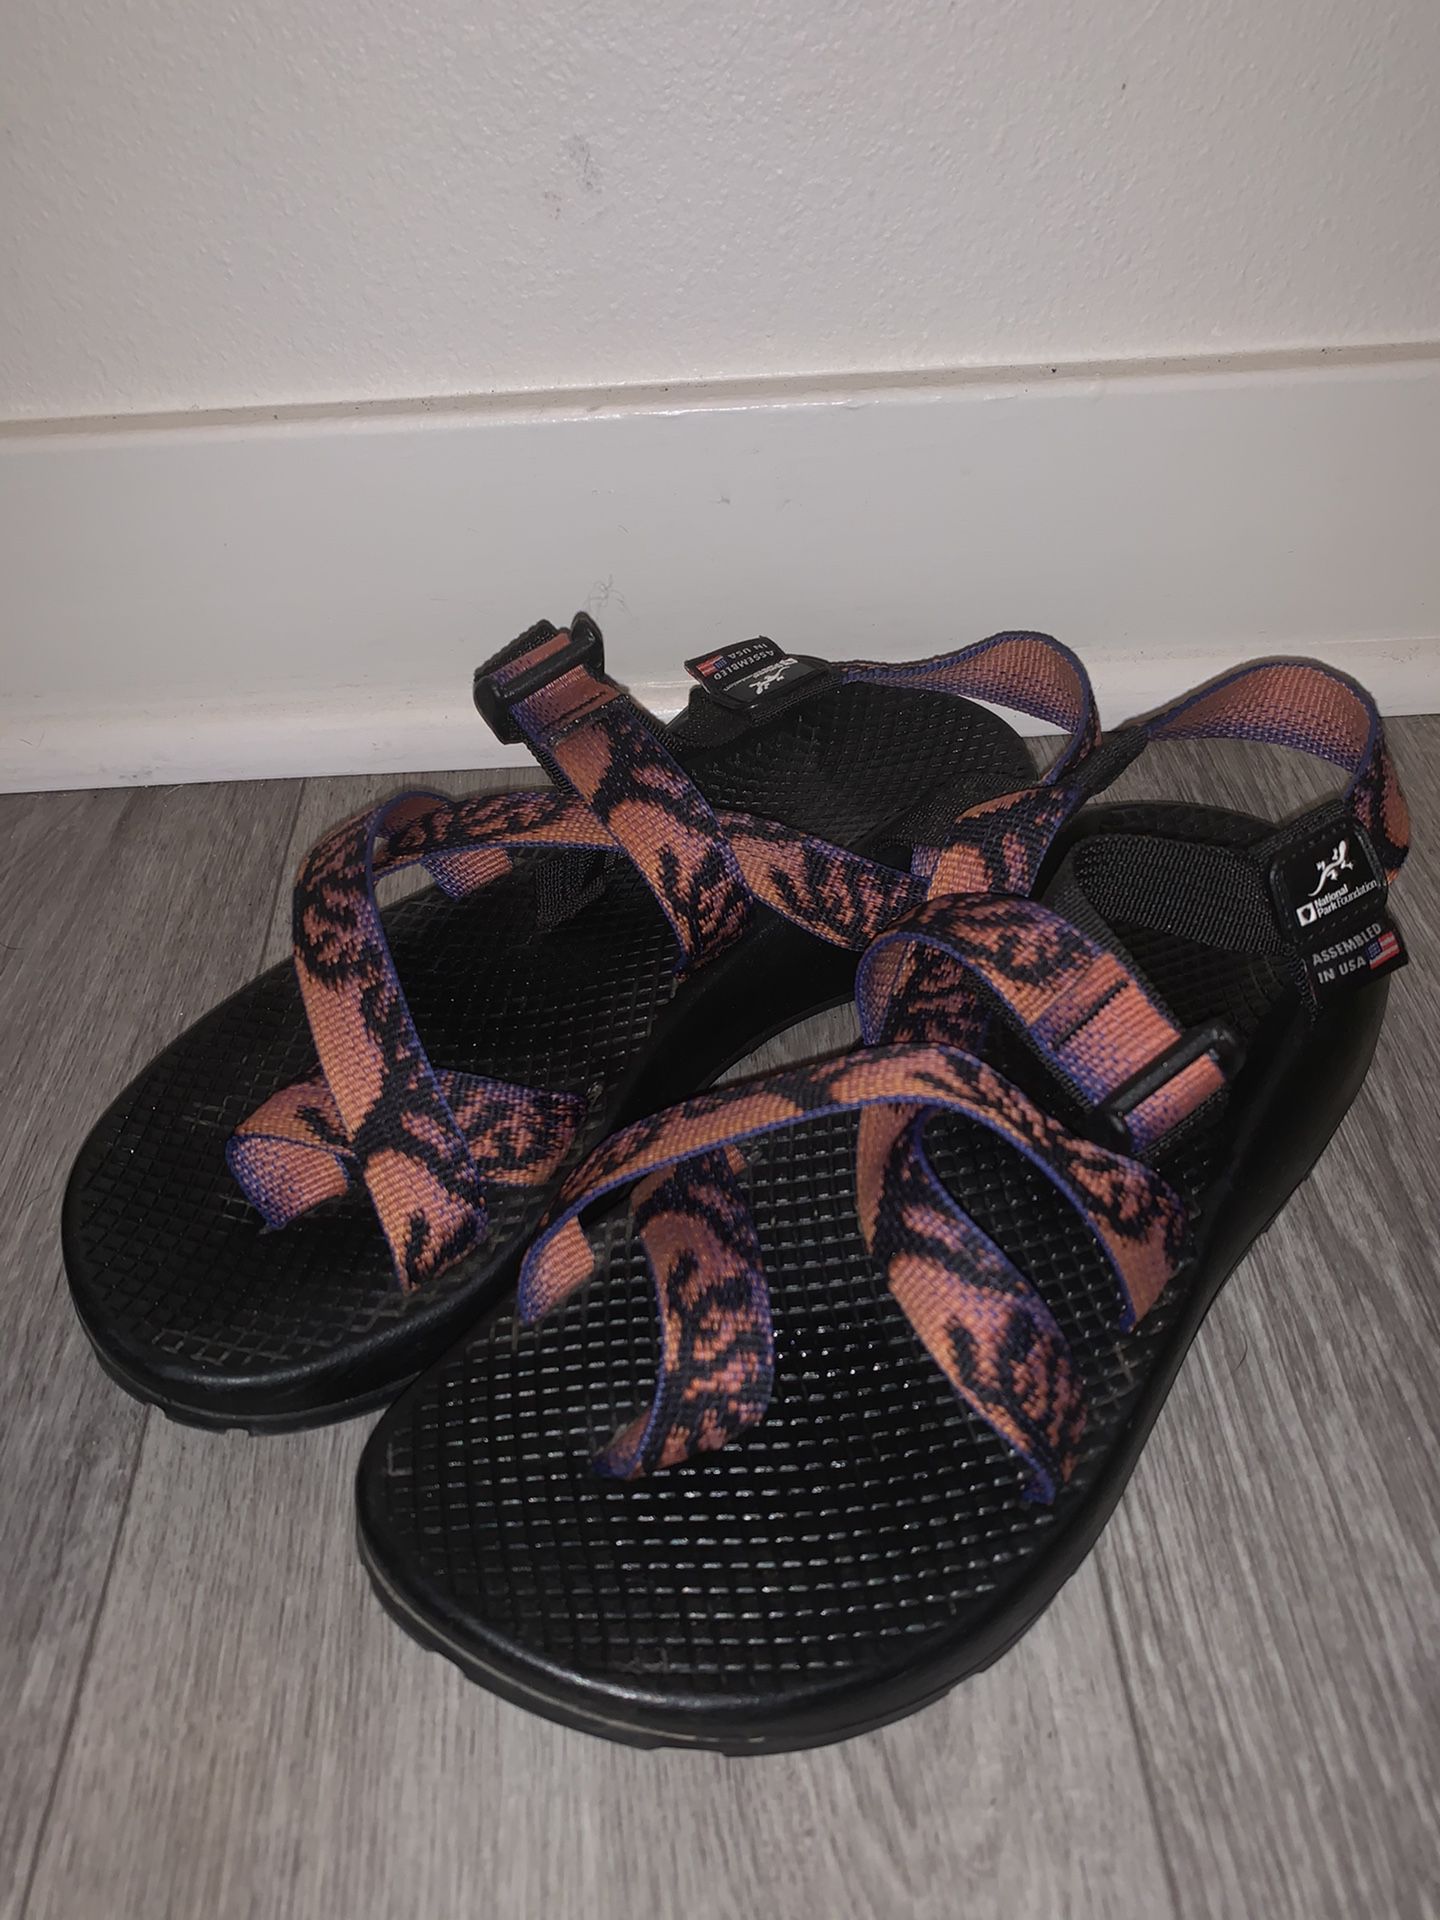 Chaco Joshua tree Women’s limited edition sandals shoes